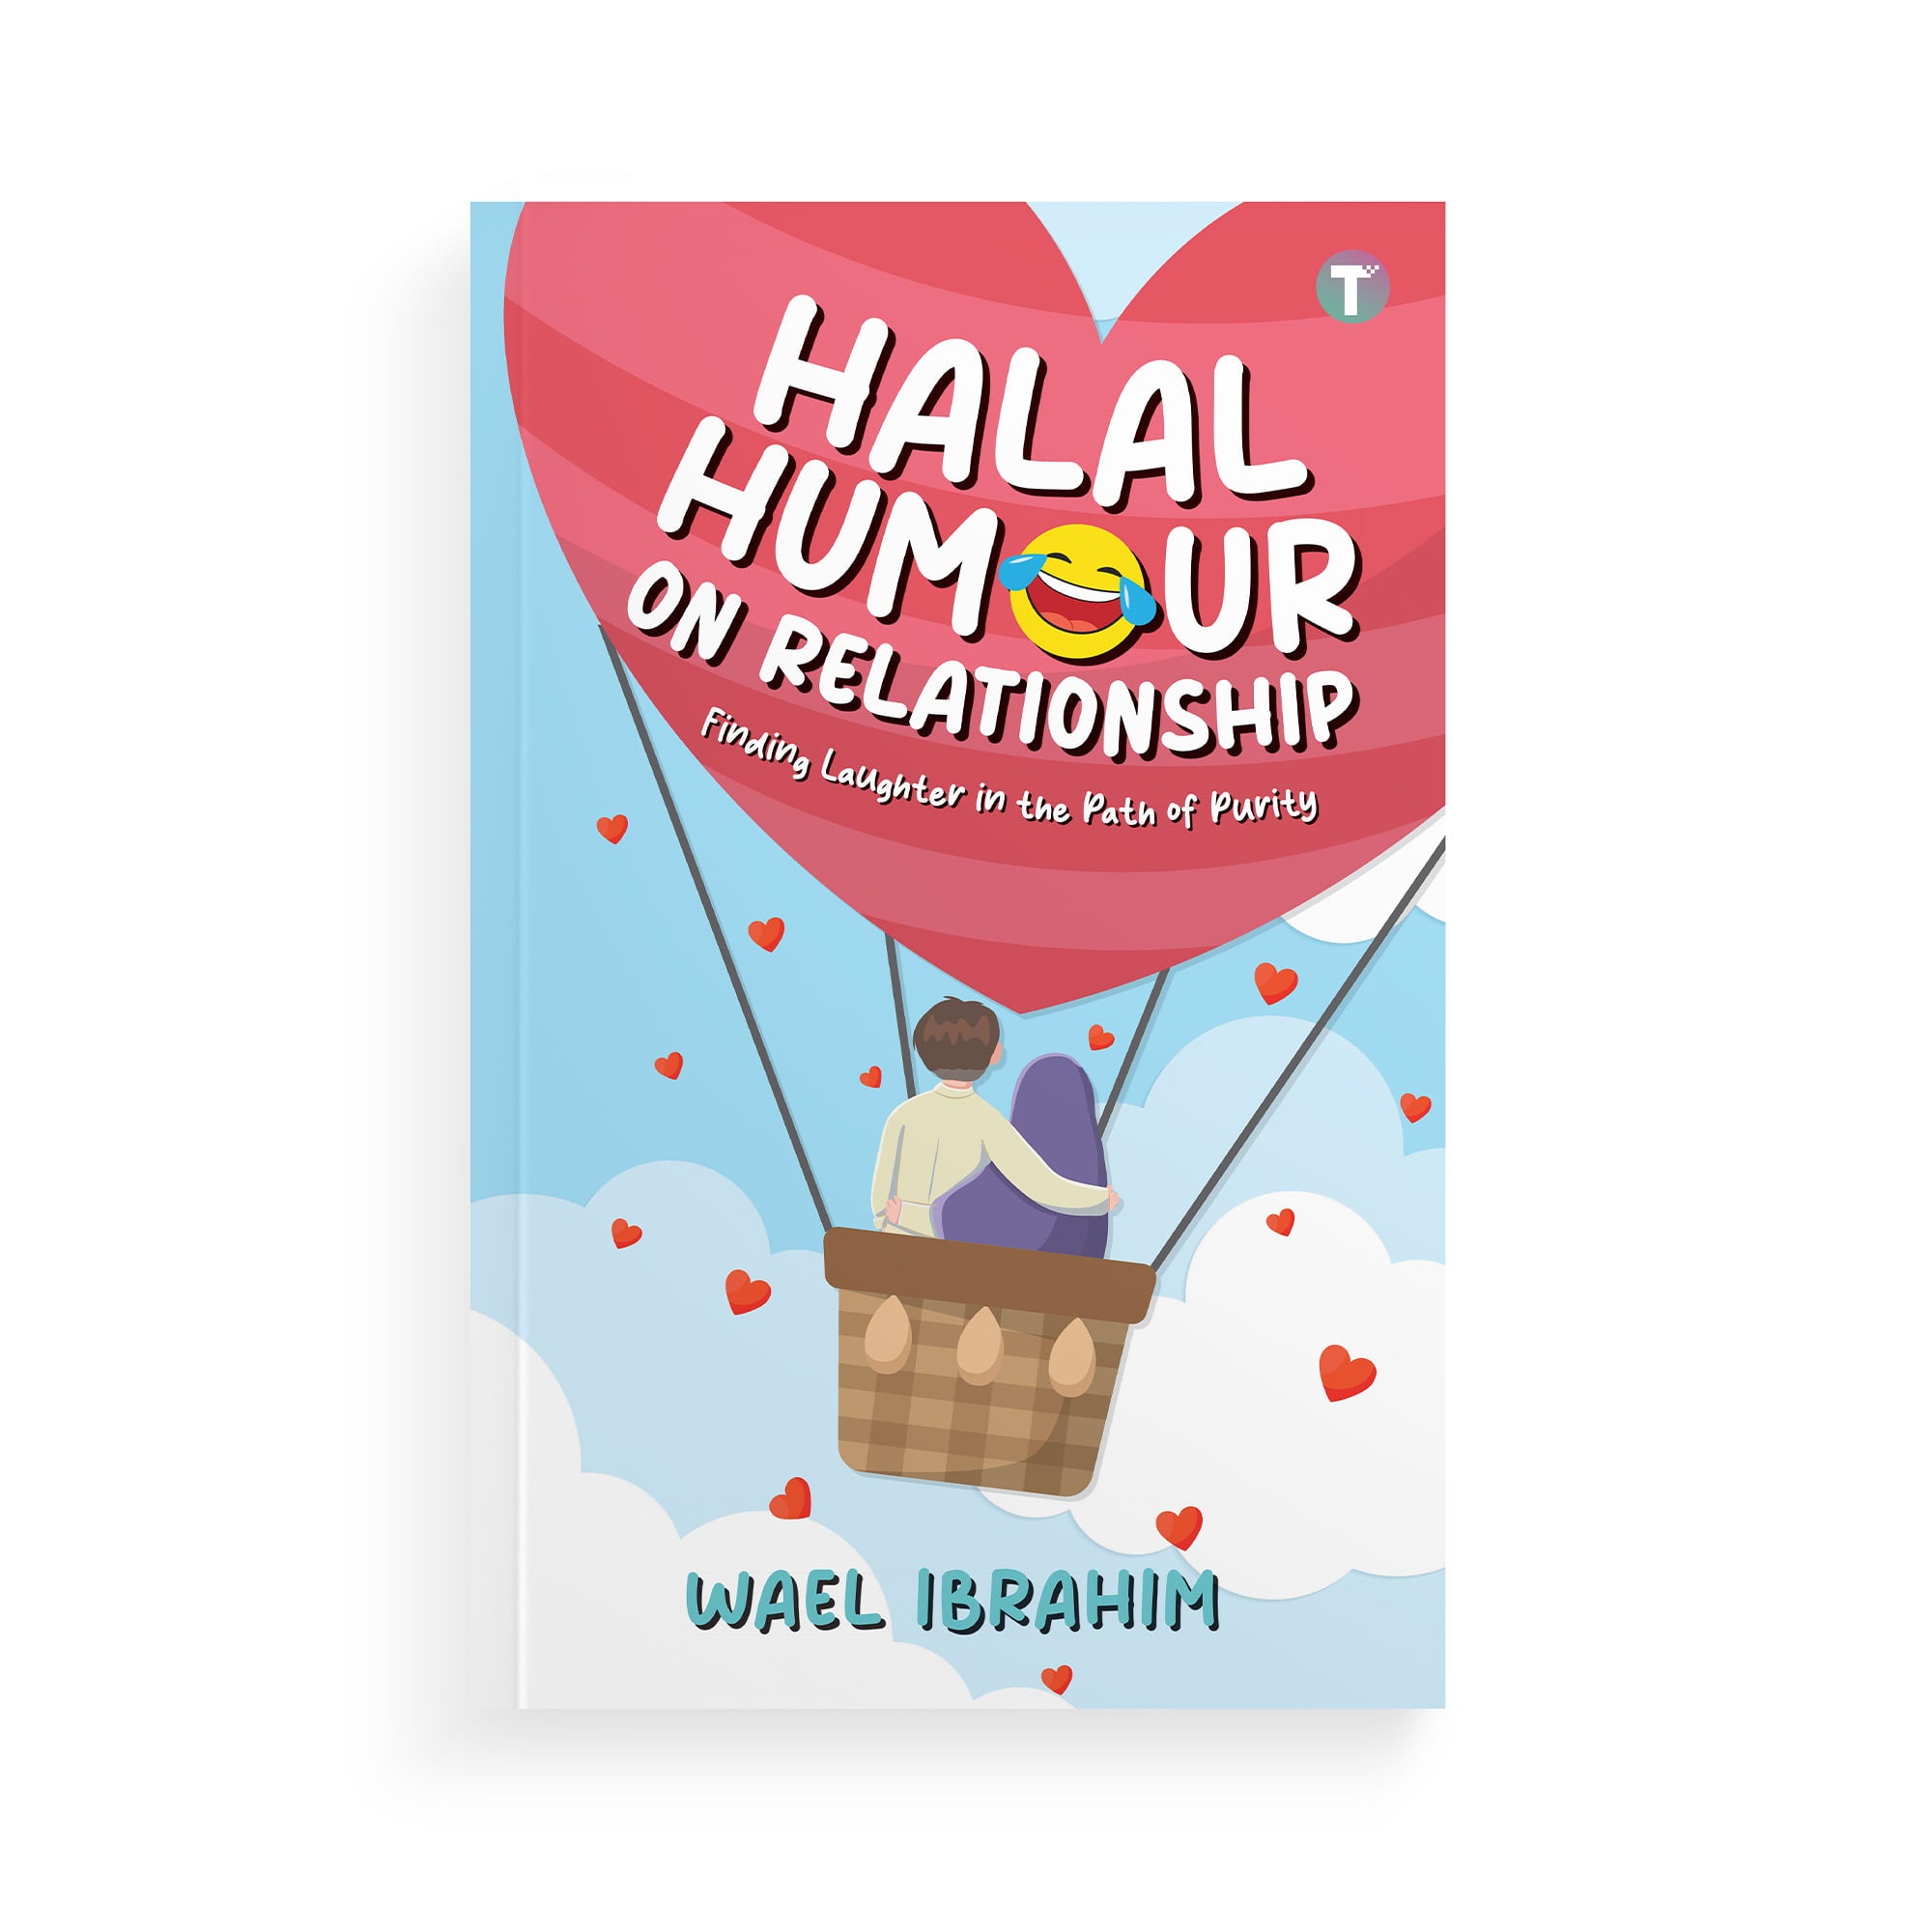 Halal Humour on Relationship: Finding Laughter in the Path of Purity